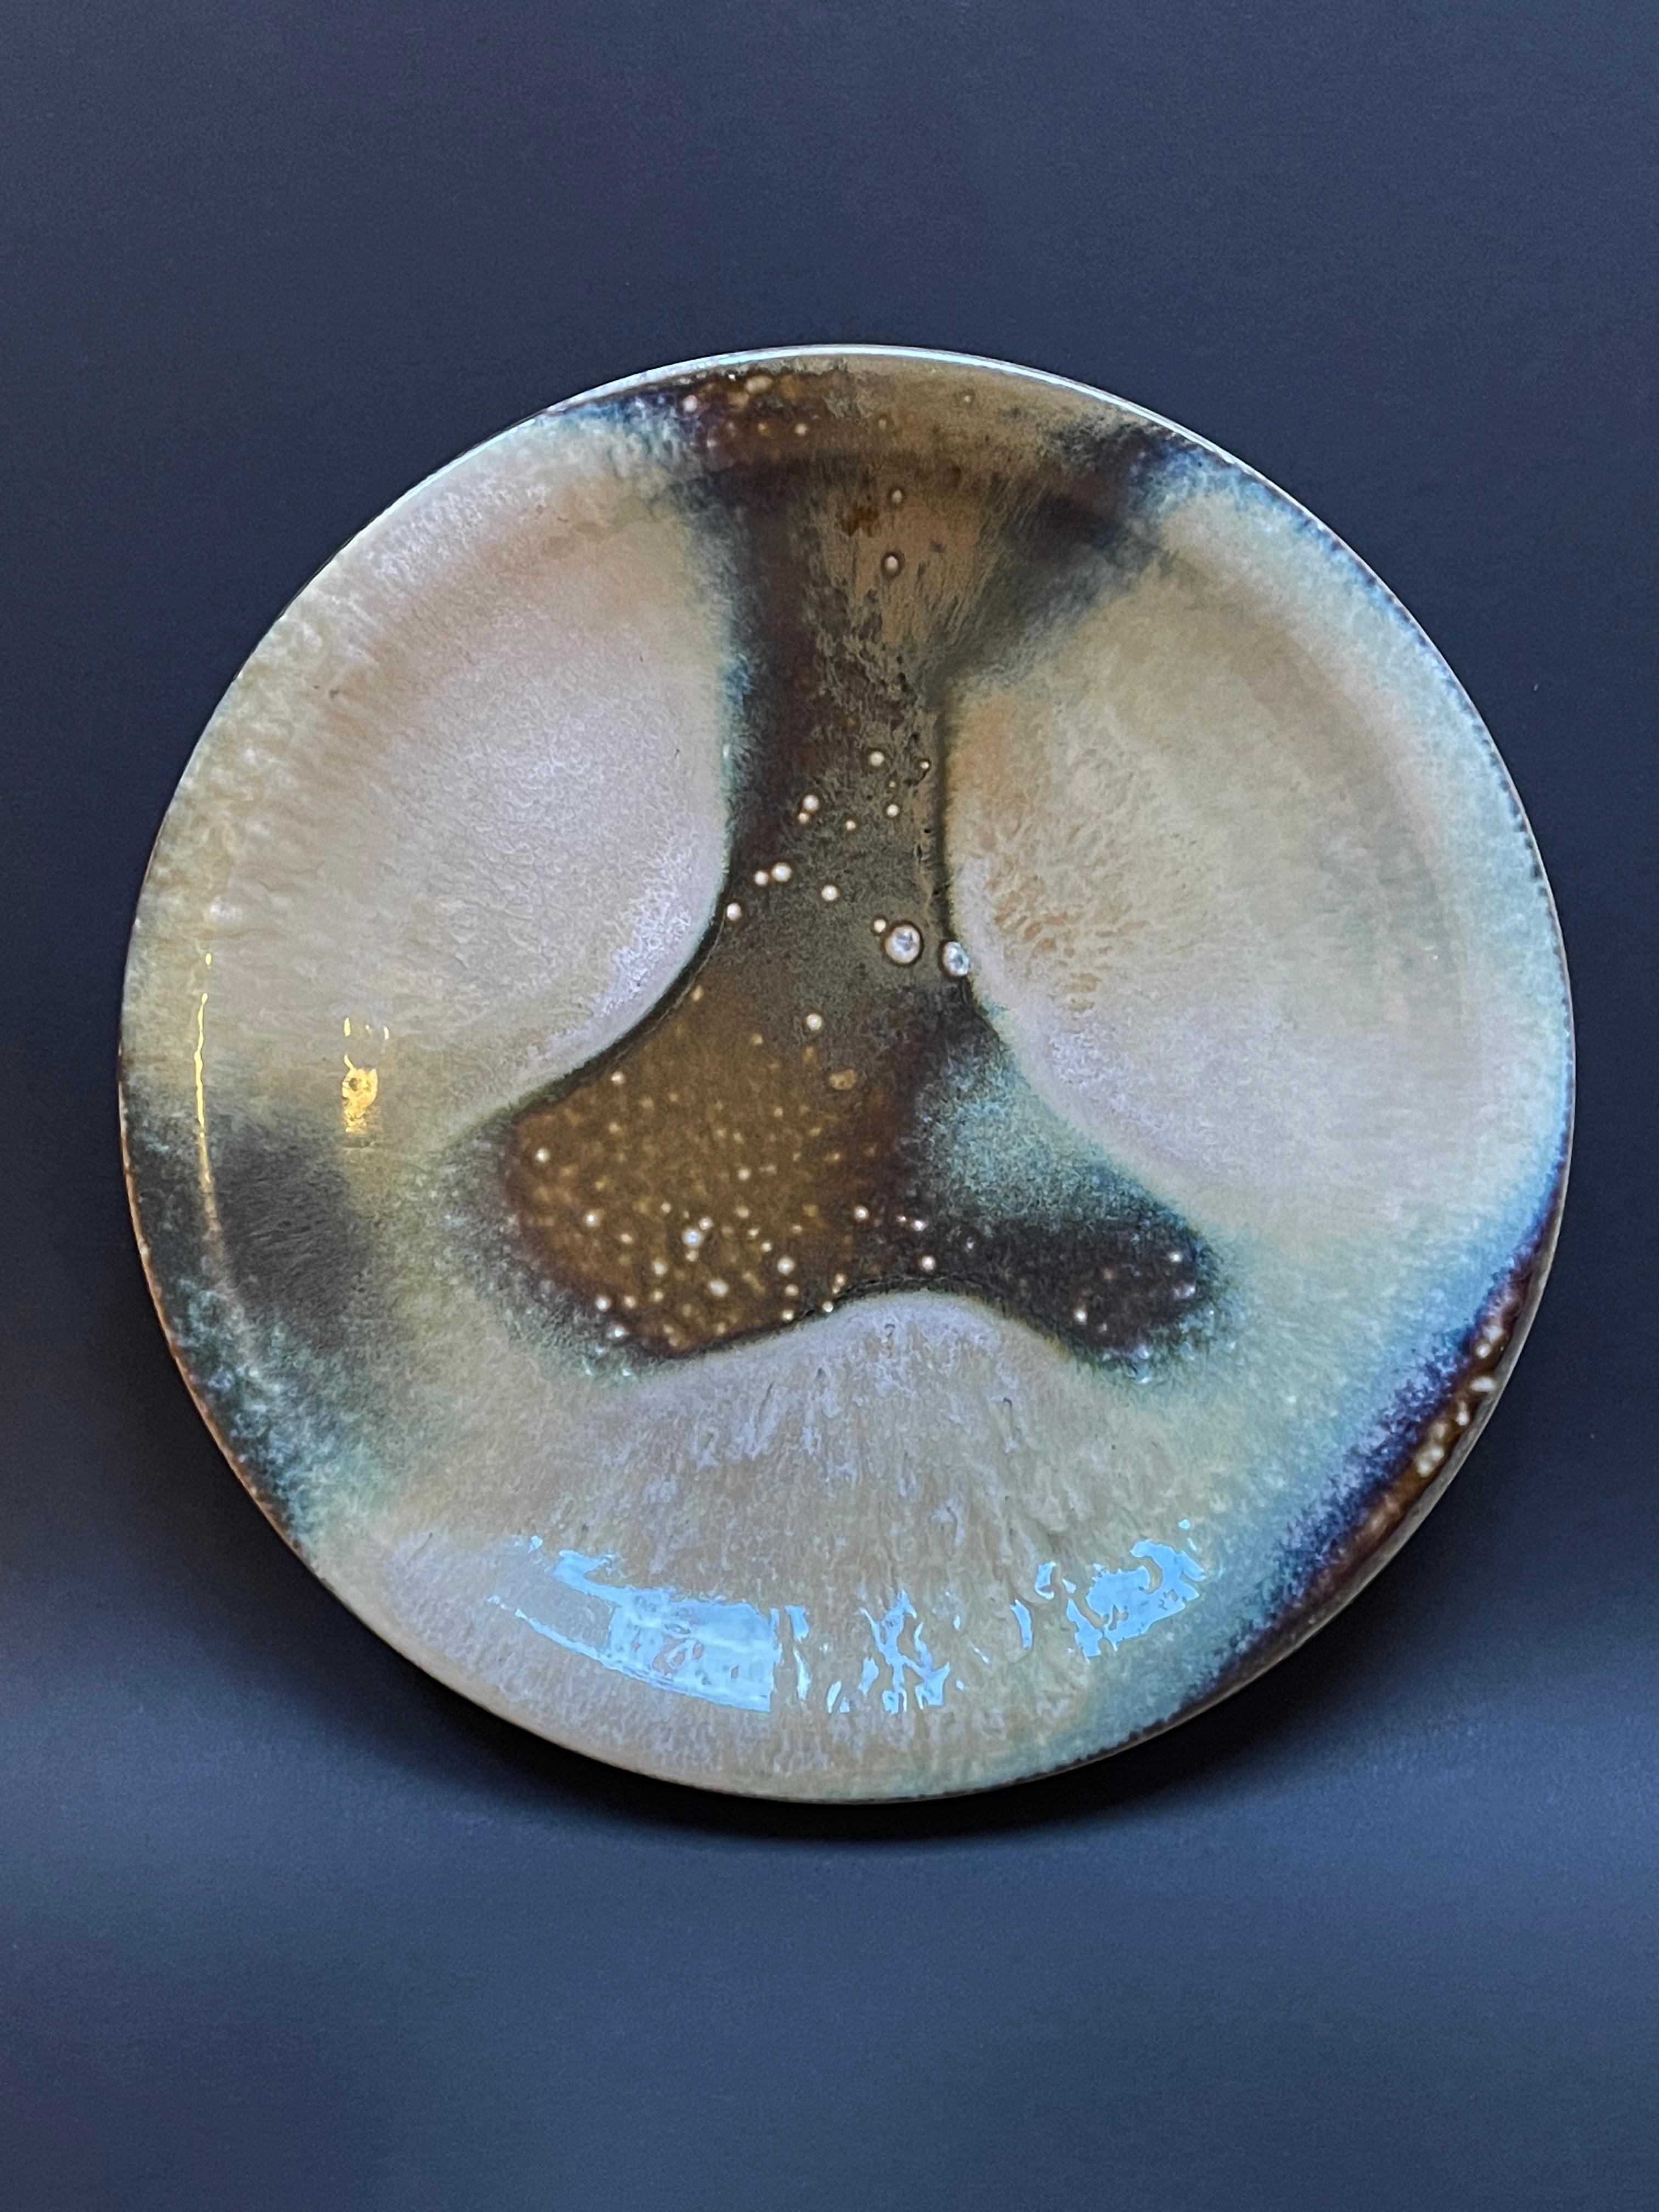 A truly unusual piece of art is this large hand-thrown bowl or serving plate from ceramic, with a vibe of Japanese design.
Beautiful decorative and timeless, glazed in a classic mid-century colour scheme with beiges, olive and turquoises, I locate